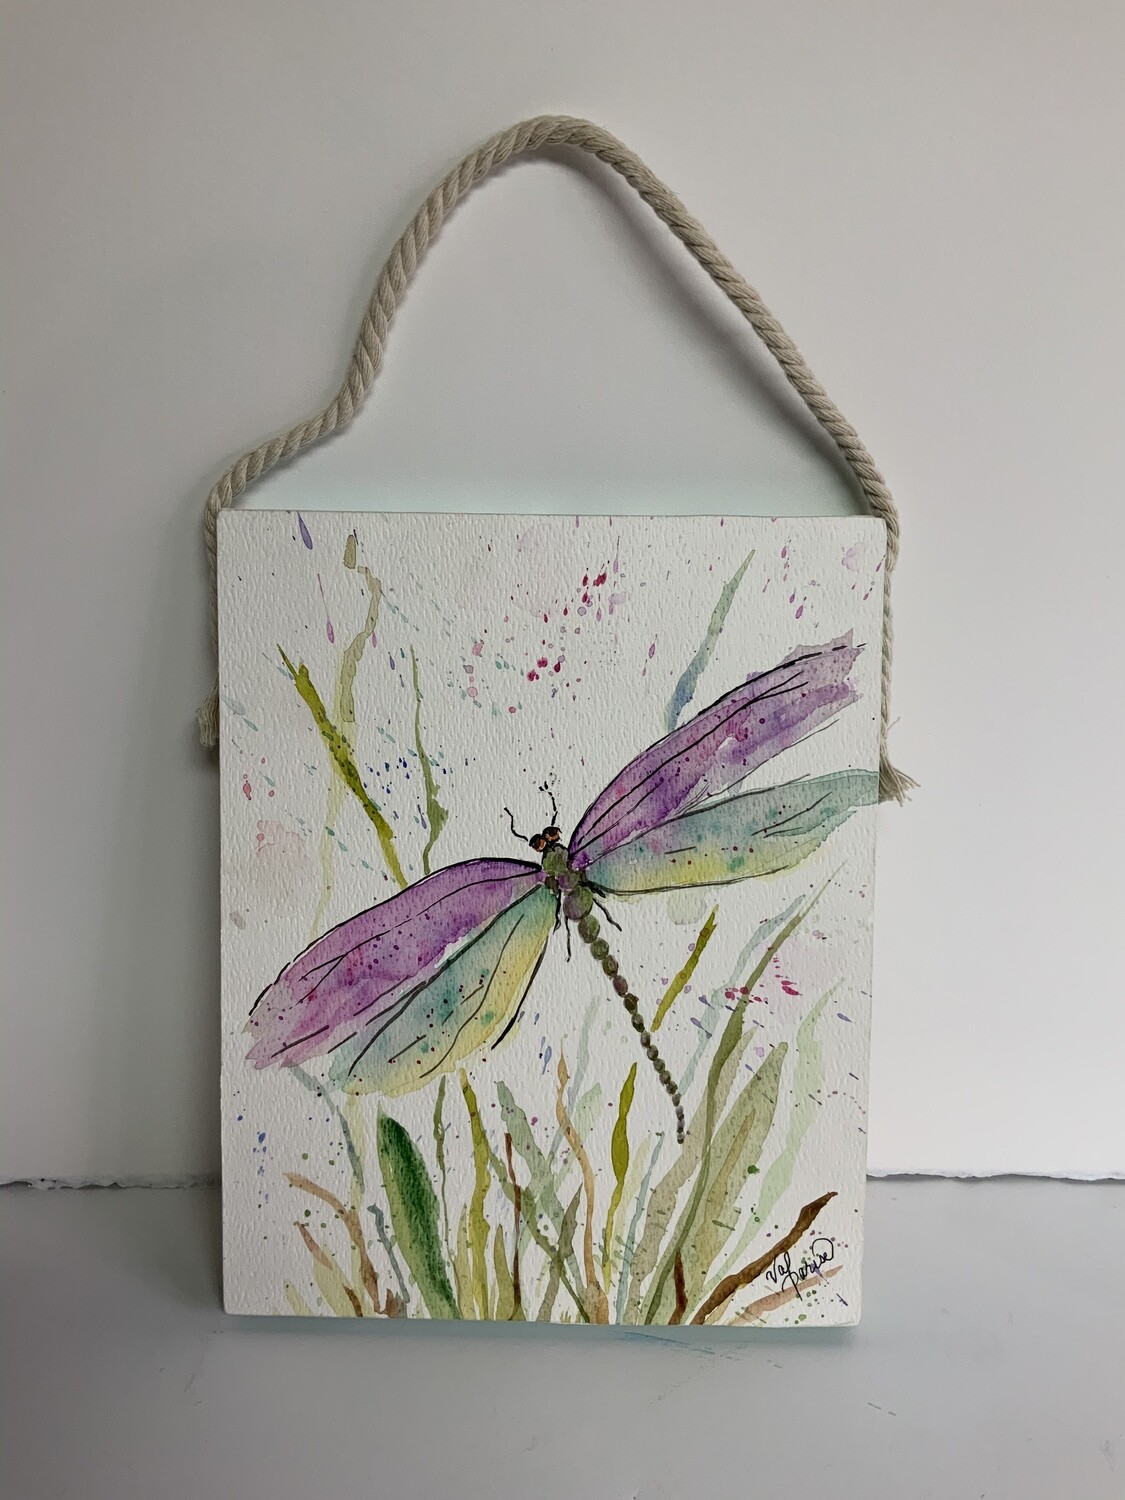 Watercolor Dragonfly mounted on wood